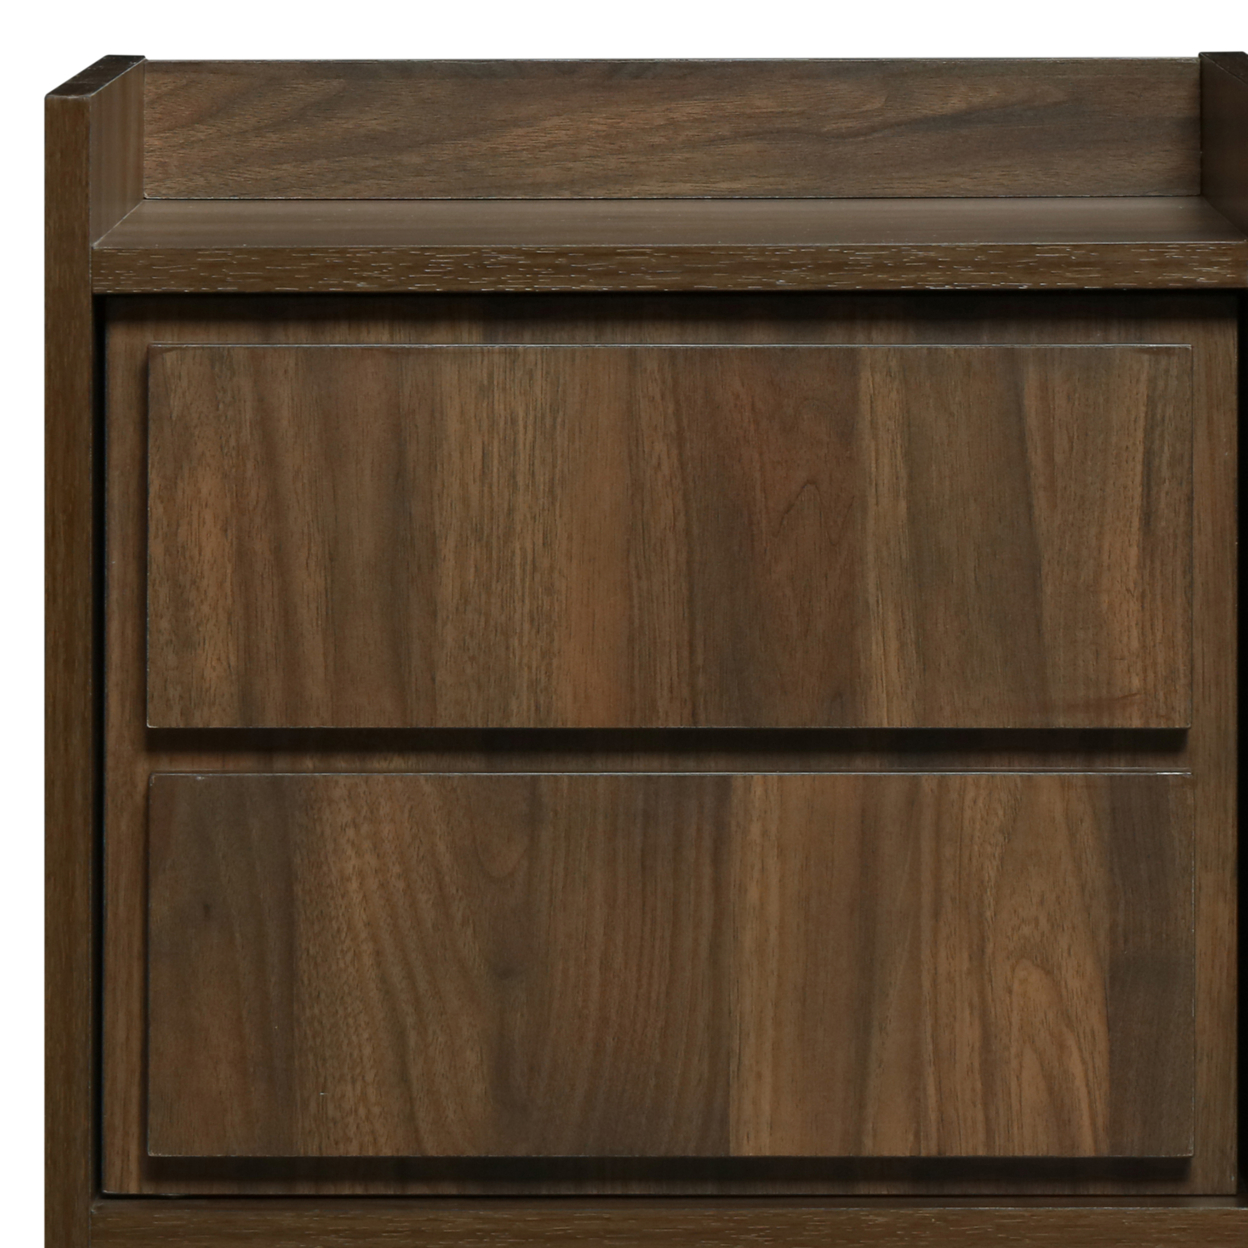 Transitional Nightstand With False Drawer Front And Woodgrain Details,Brown- Saltoro Sherpi